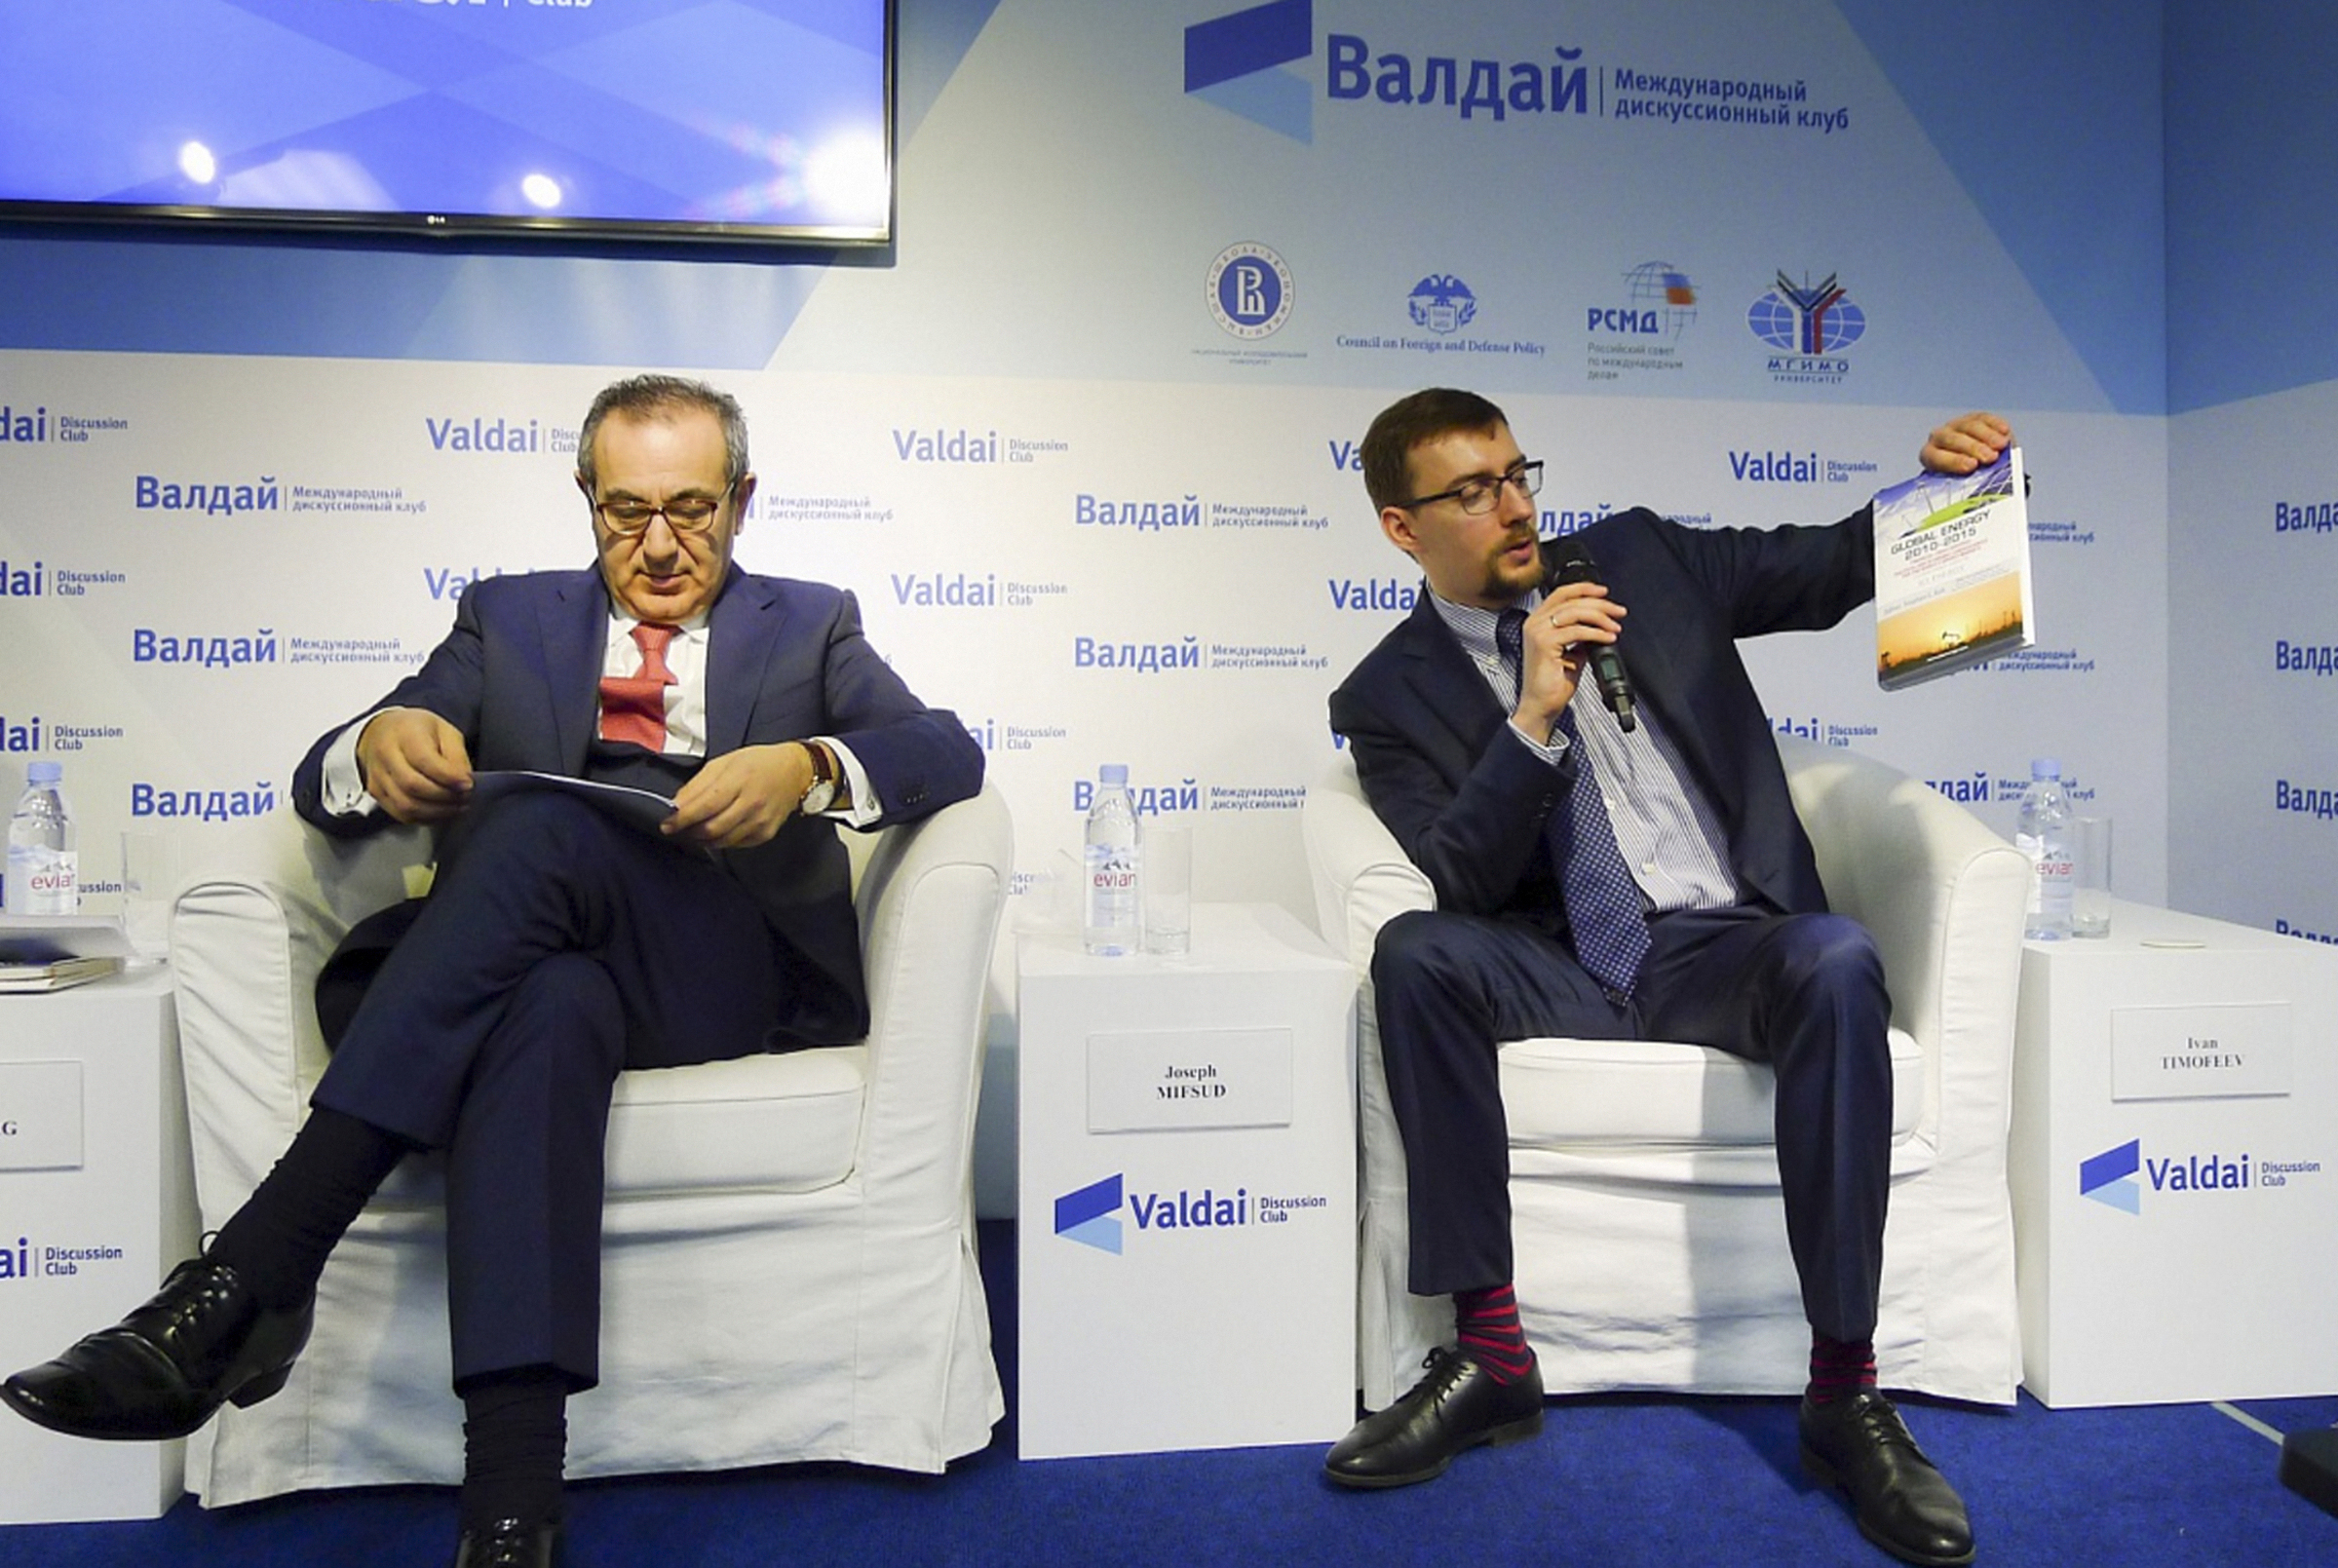 PHOTO: Ivan Timofeev, right, and Joseph Mifsud attend the Valdai Discussion Club Conference following the results of the closed-door Iran-Russia discussion in Moscow, Russia.